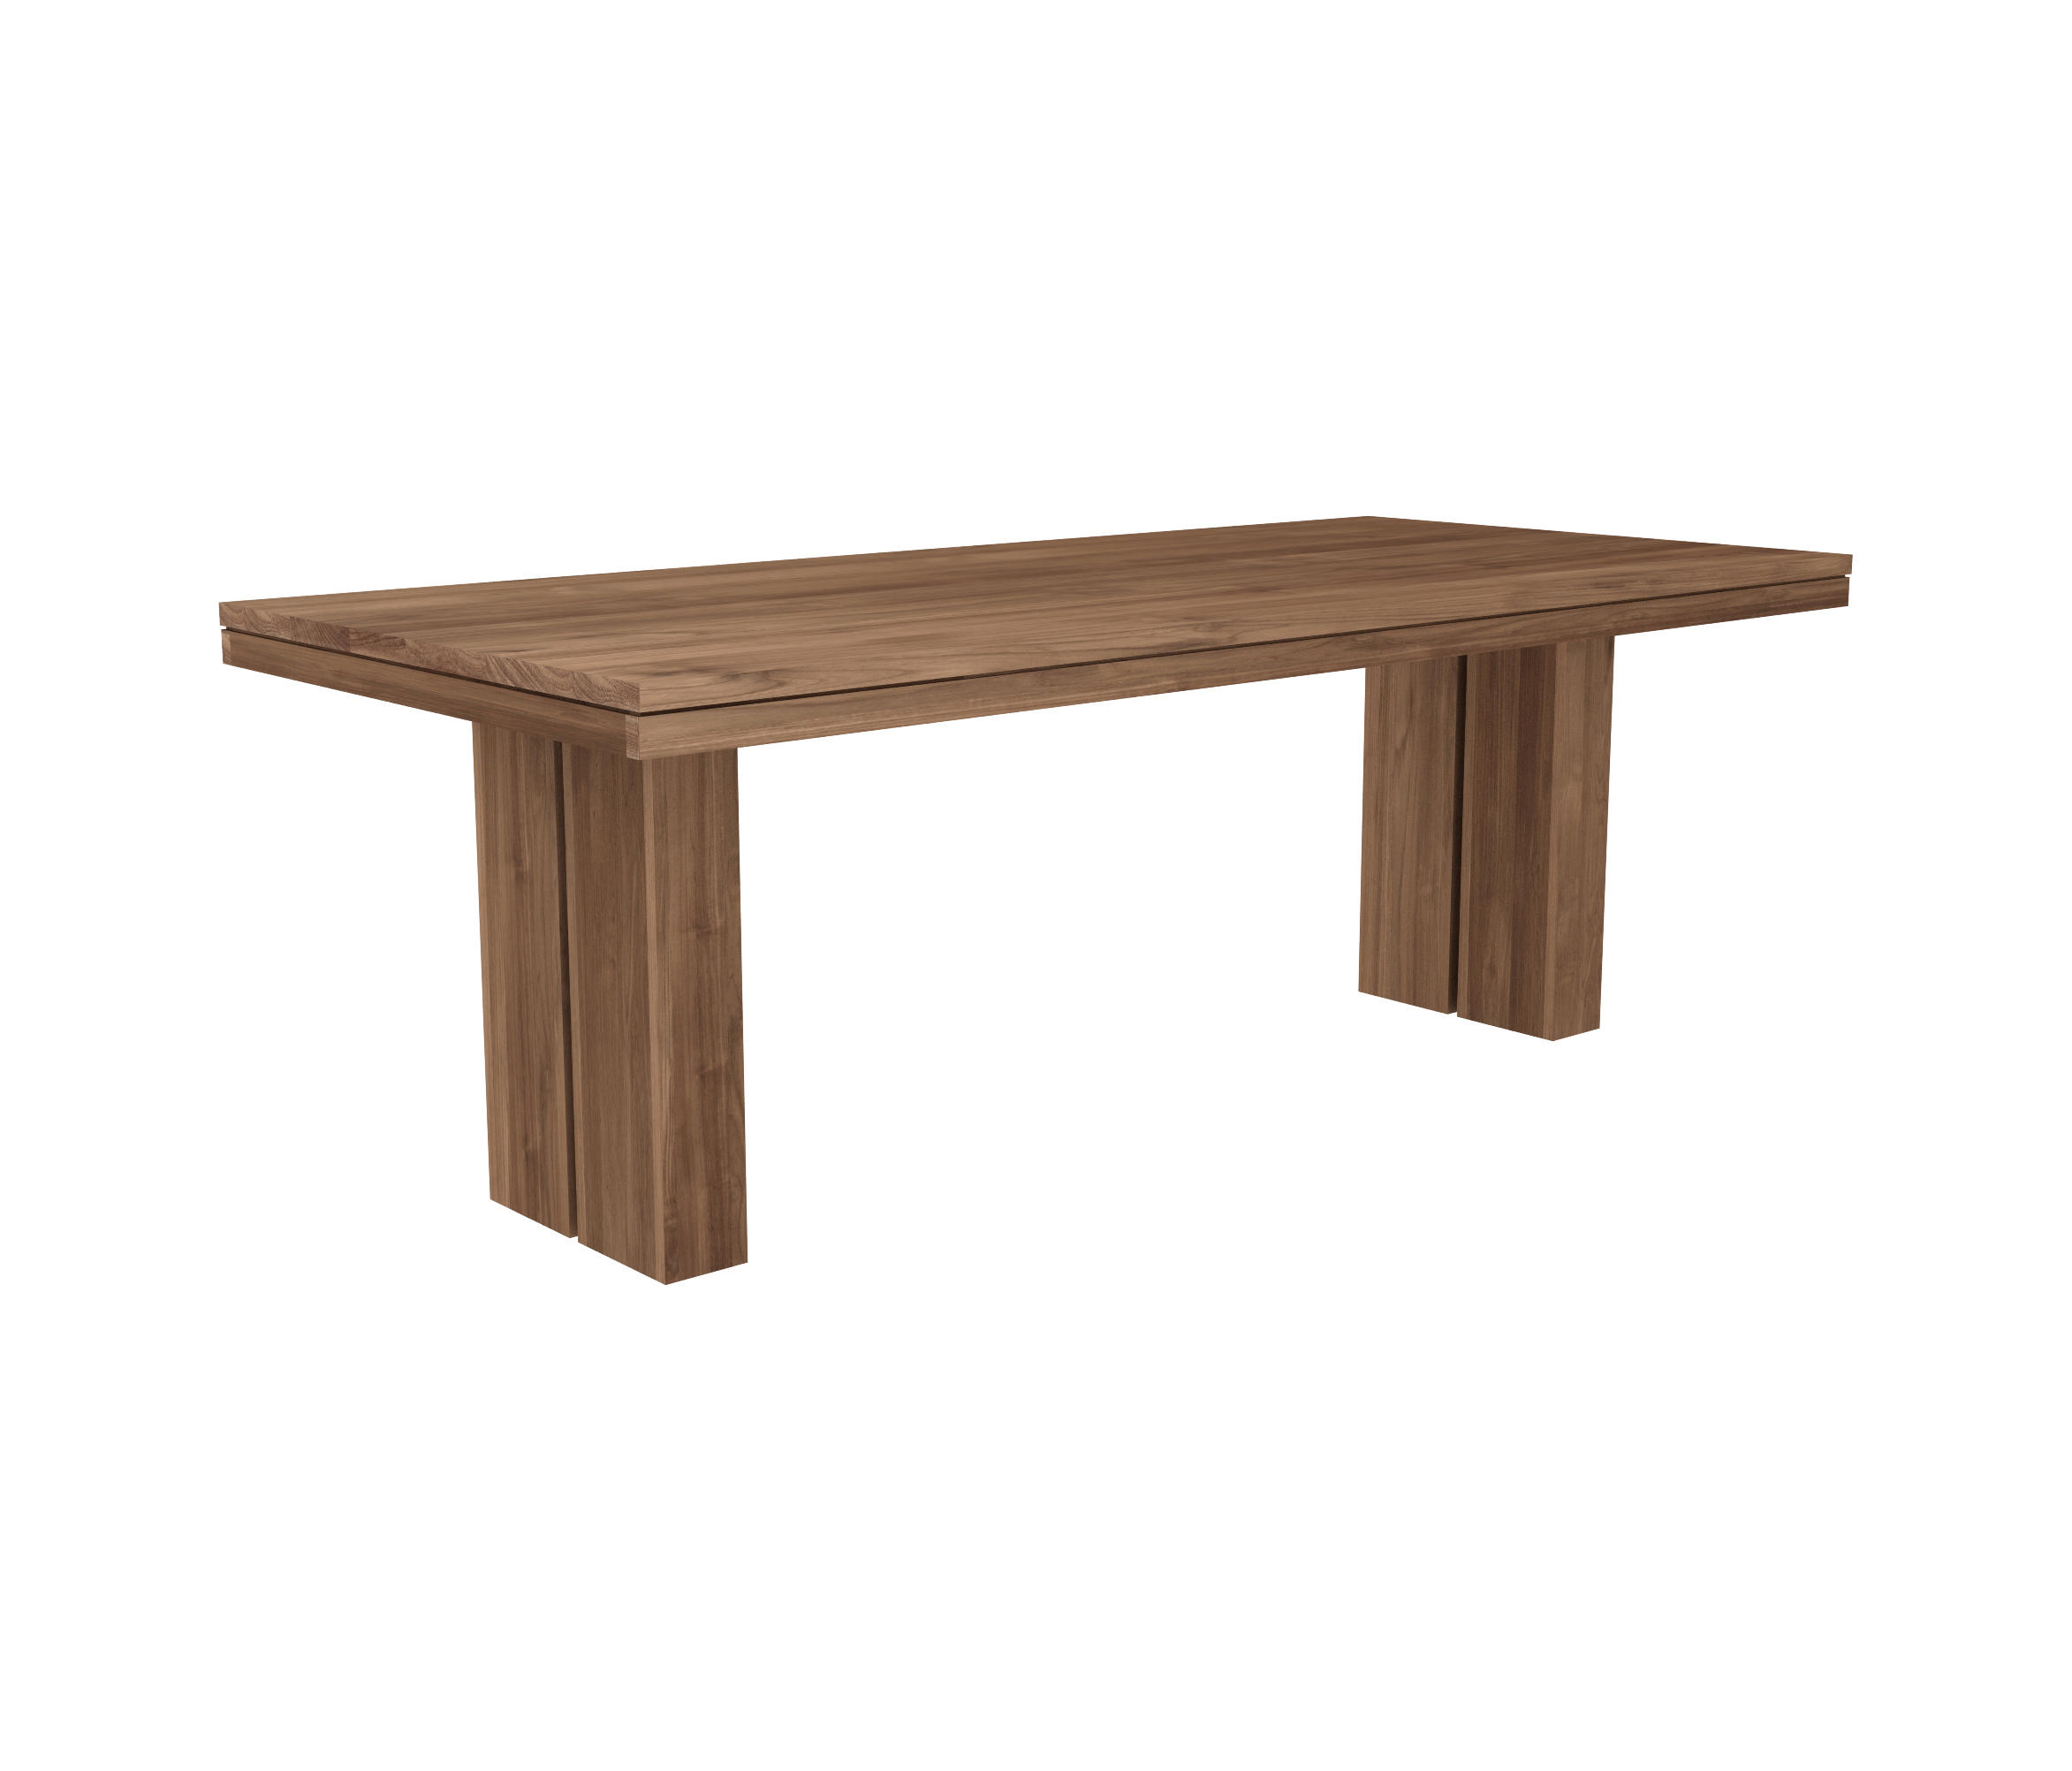 Teak Double dining table 220 | Architonic